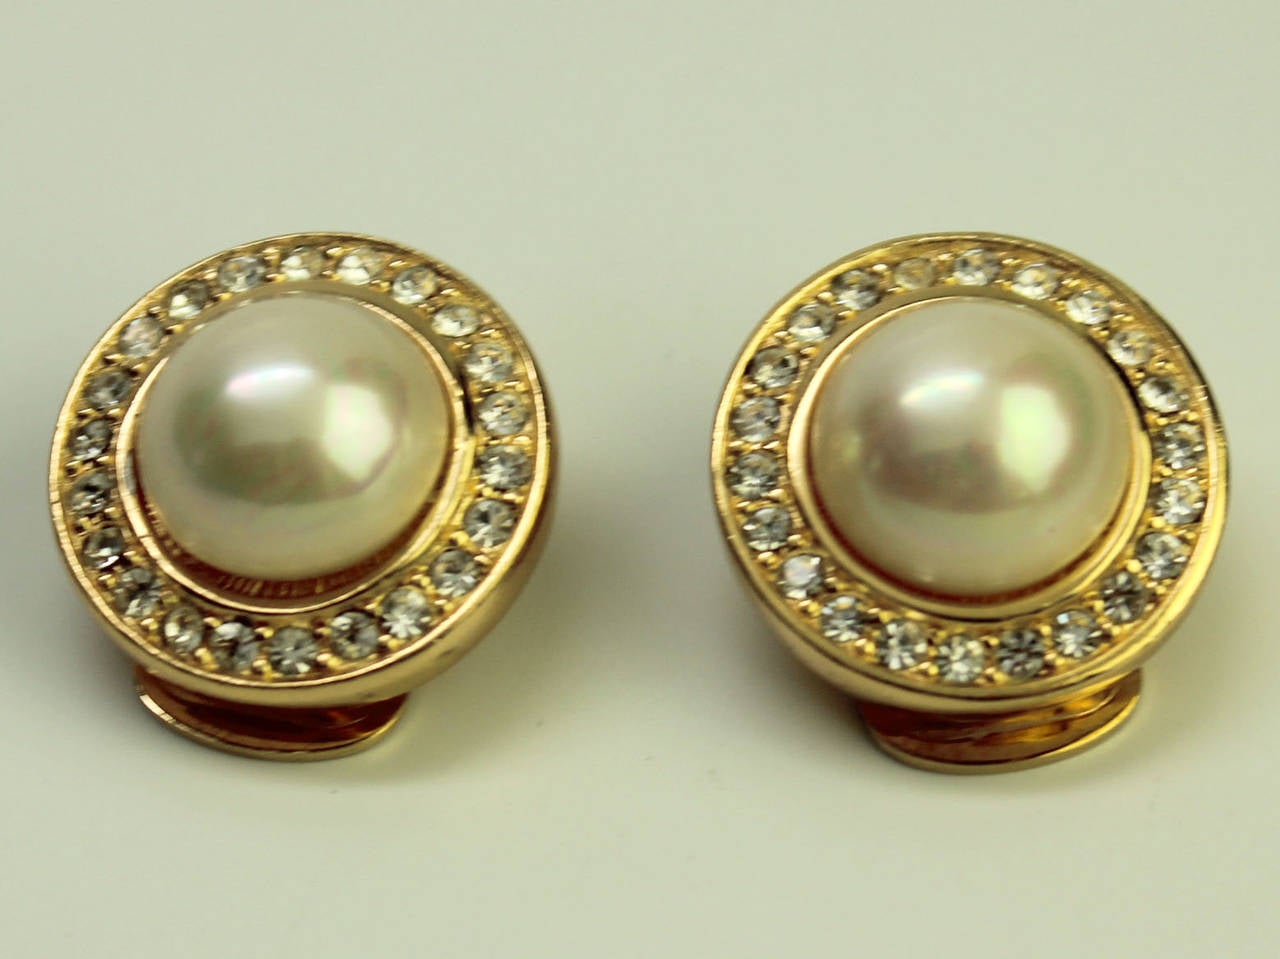 These Christian Dior 1980's gold plated rhinestone and pearl earrings are a classic addition to any wardrobe. The style is similar to Dior's designs of the 1950's. The clip backing fits securely but comfortably on the earlobe.